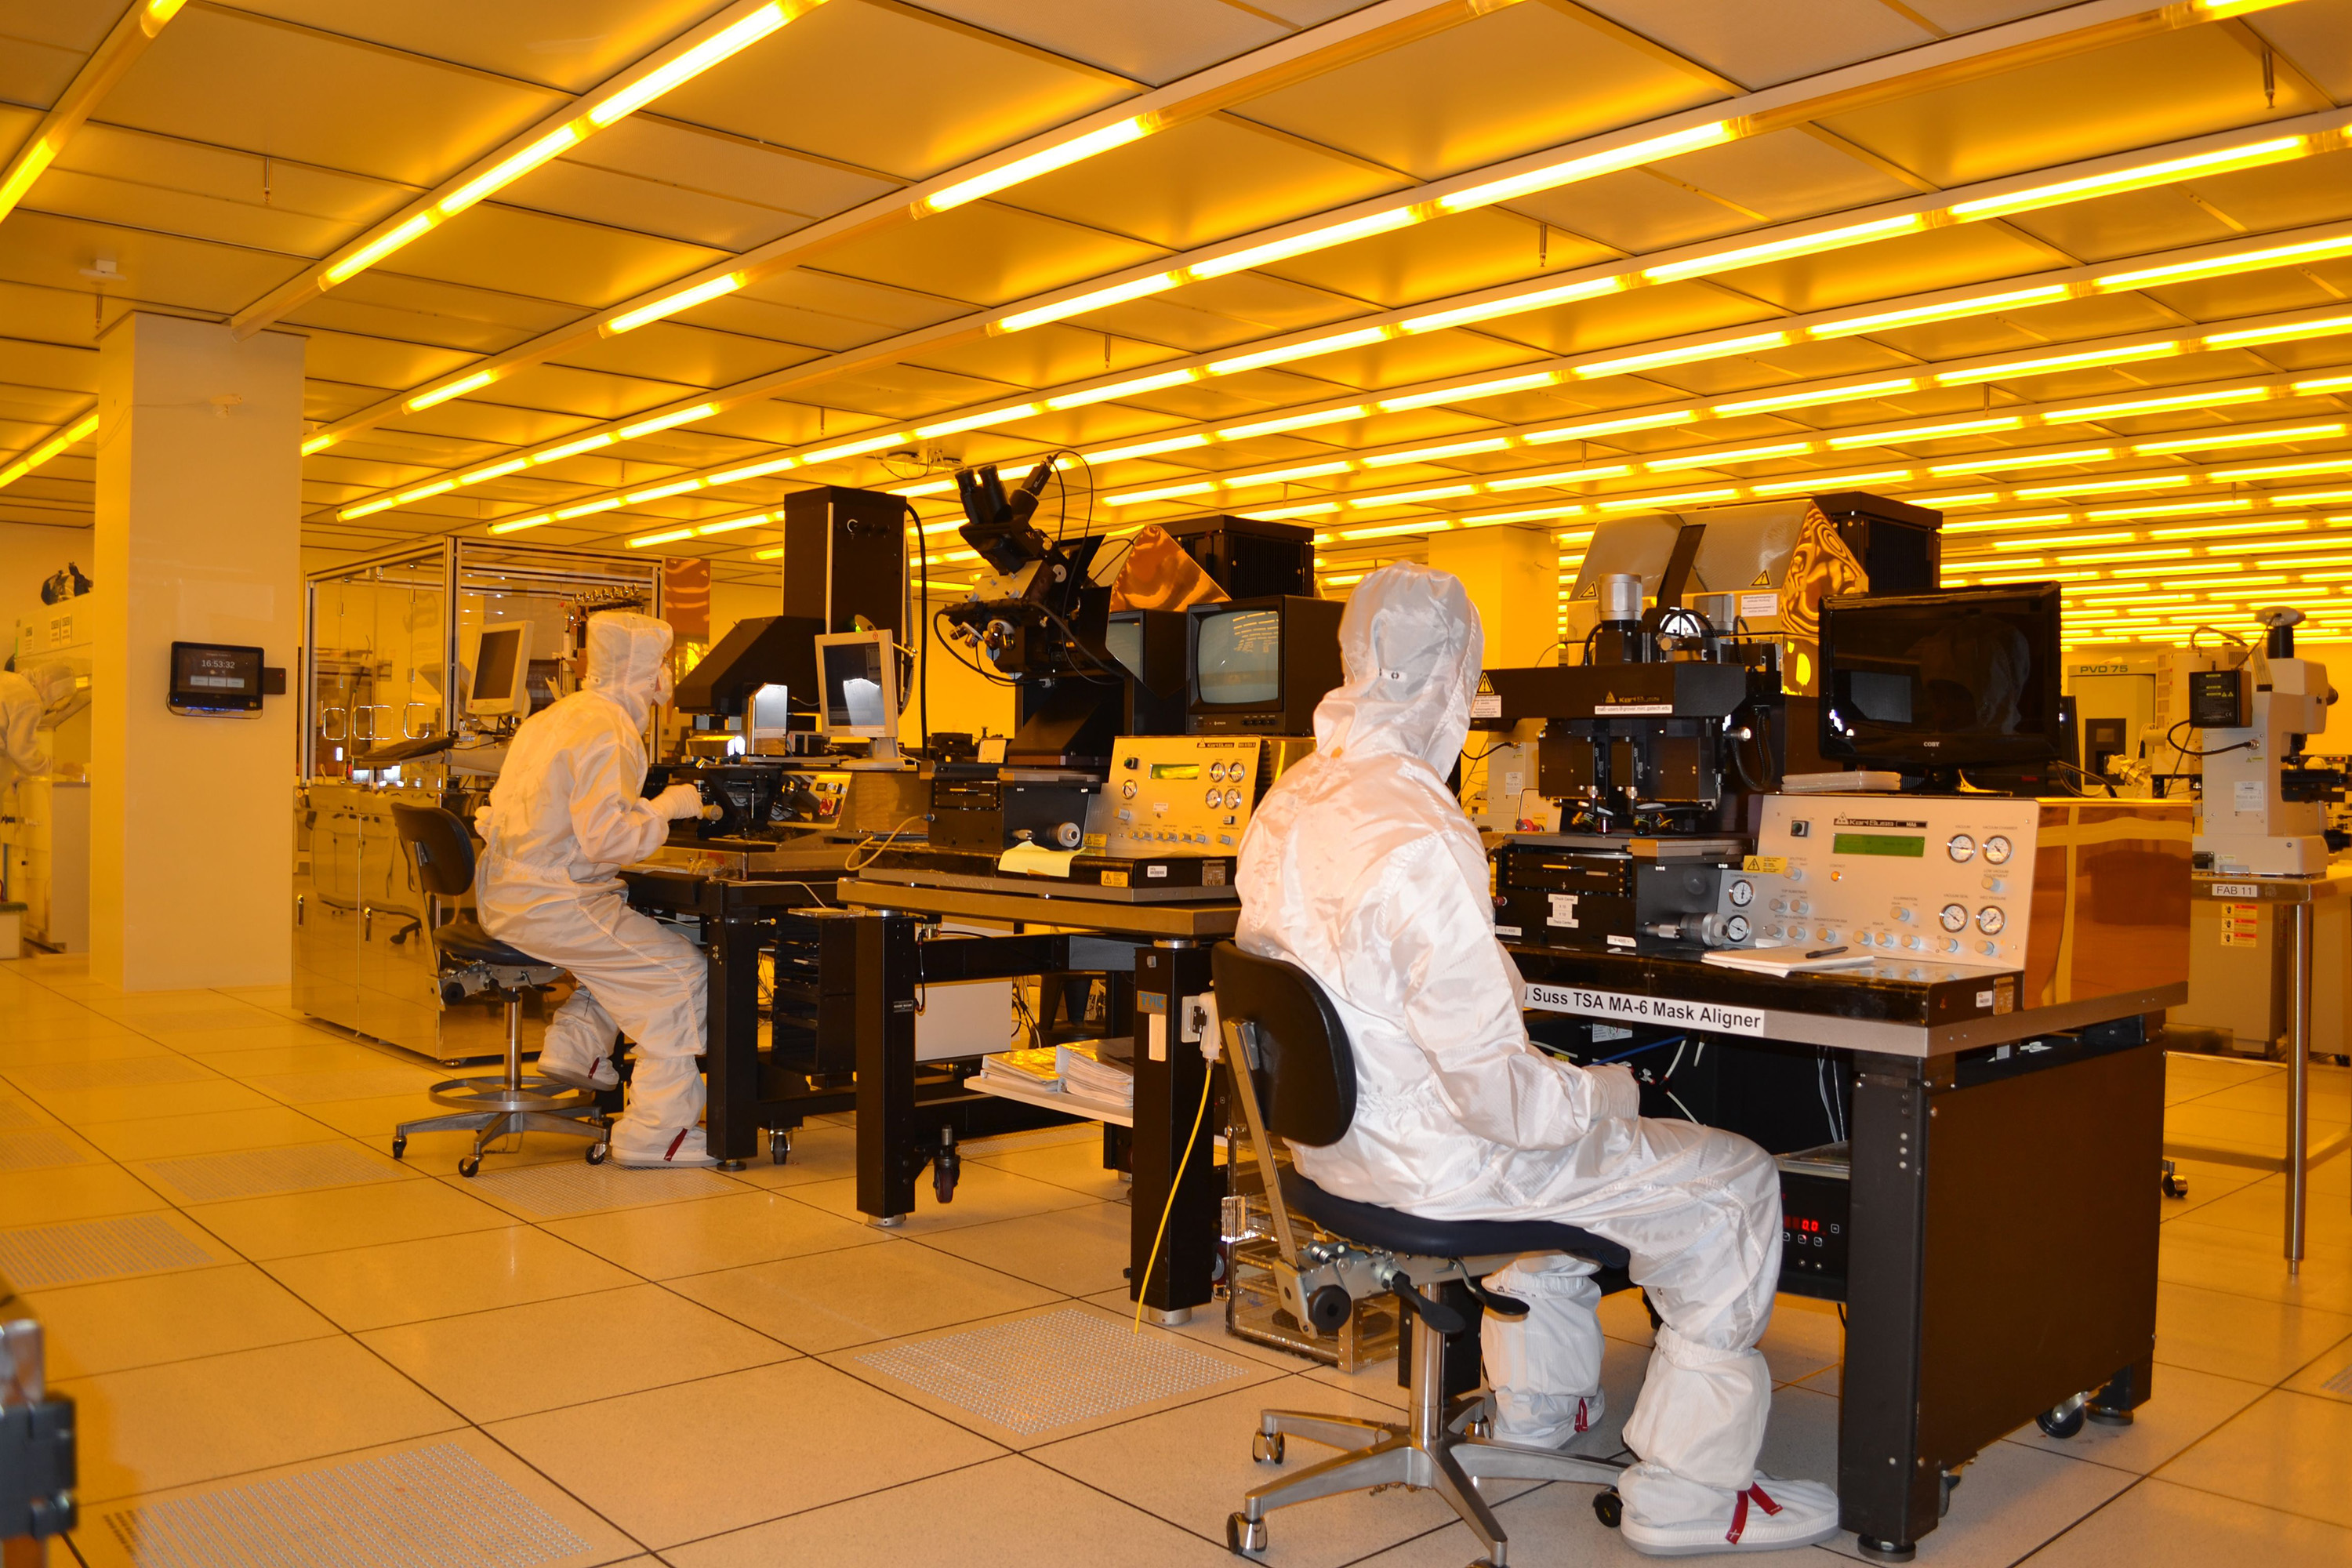 Georgia Tech has been chosen as the Coordinating Office for the National Nanotechnology Coordinated Infrastructure (NNCI) program. Shown are clean room facilities in the Marcus Nanotechnology Building at Georgia Tech.